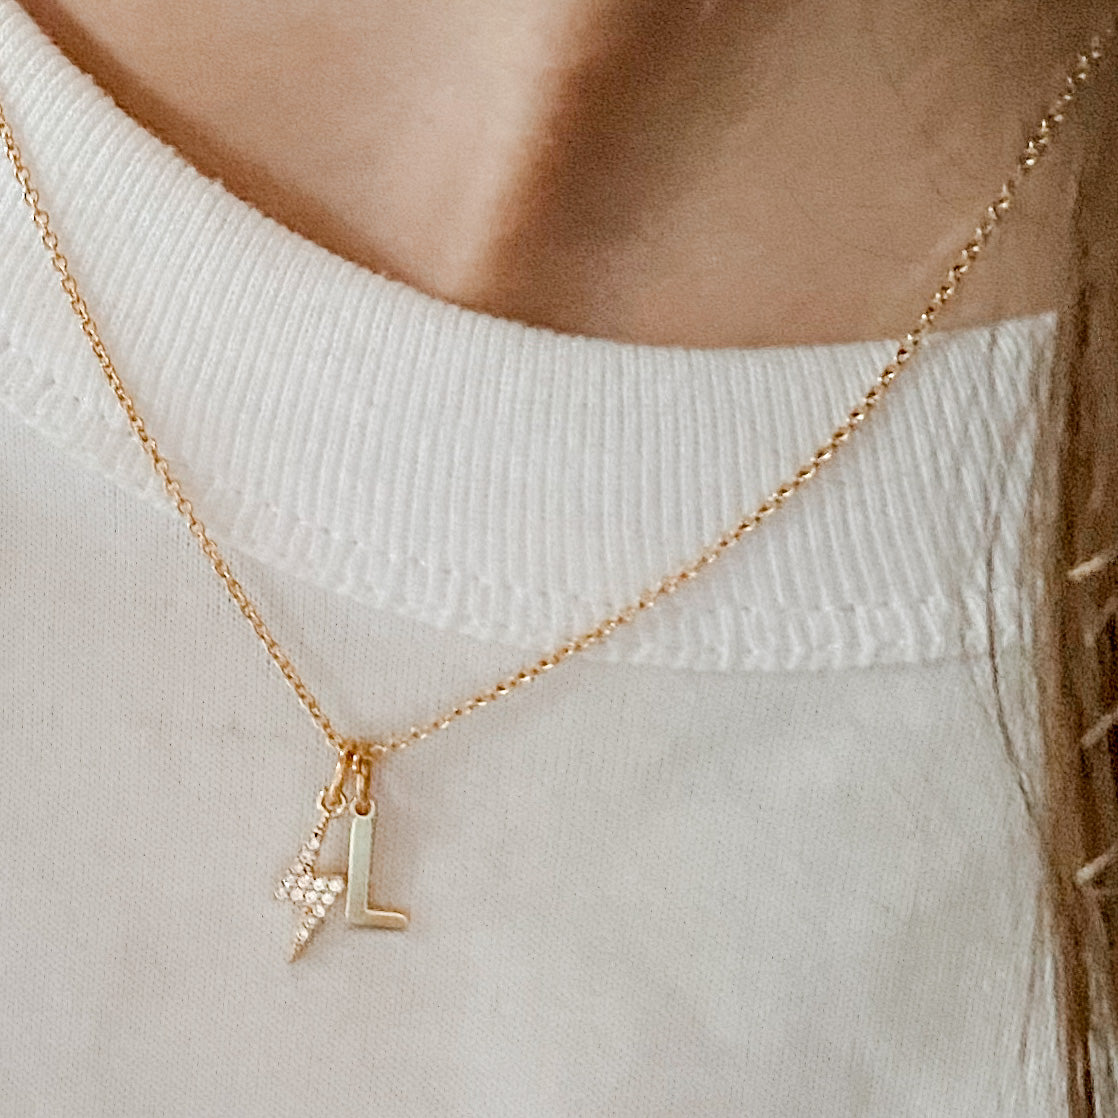 Initial & Charms Necklace